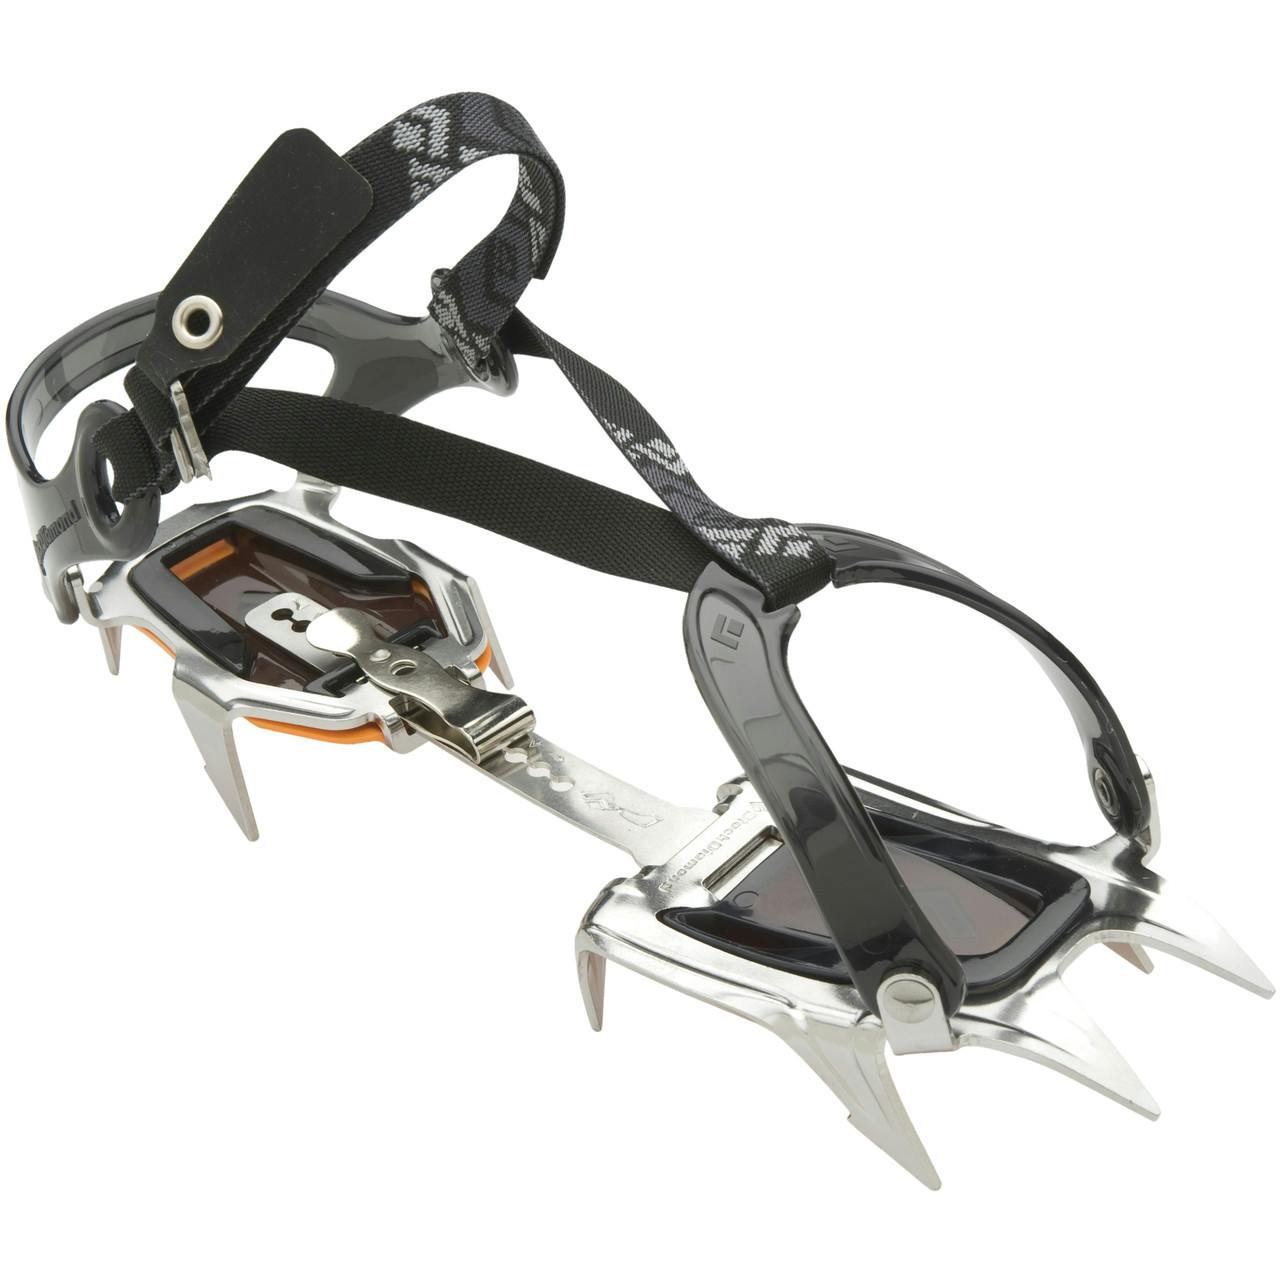 Contact Stainless Steel Crampons Polished